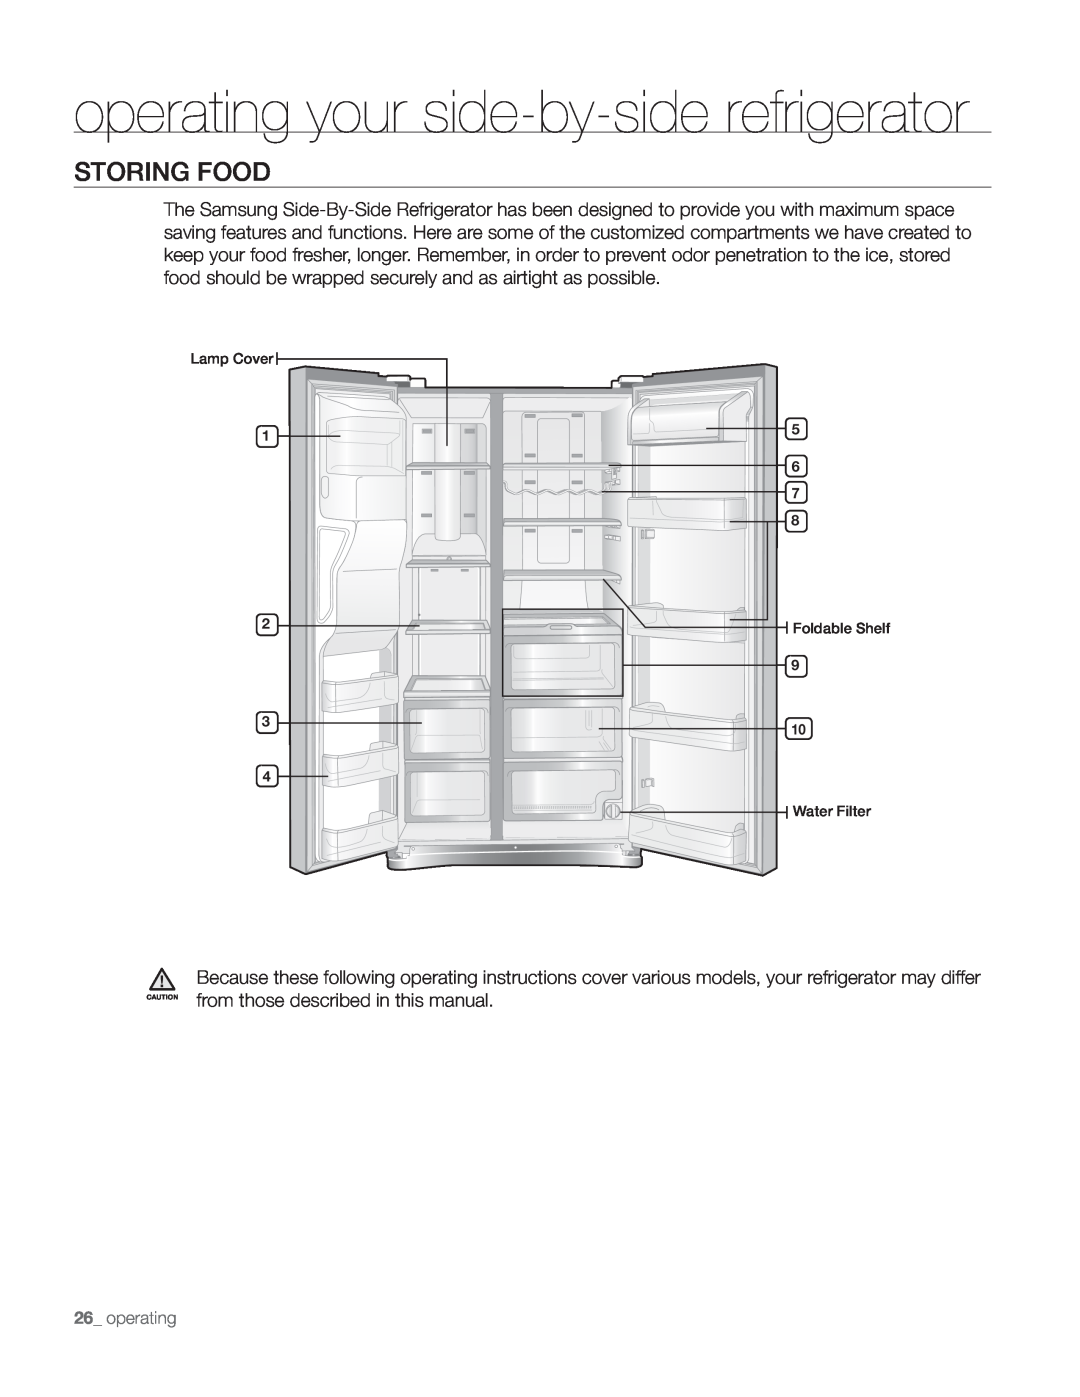 Samsung DA68-01890Q user manual Storing Food, operating your side-by-siderefrigerator, from those described in this manual 